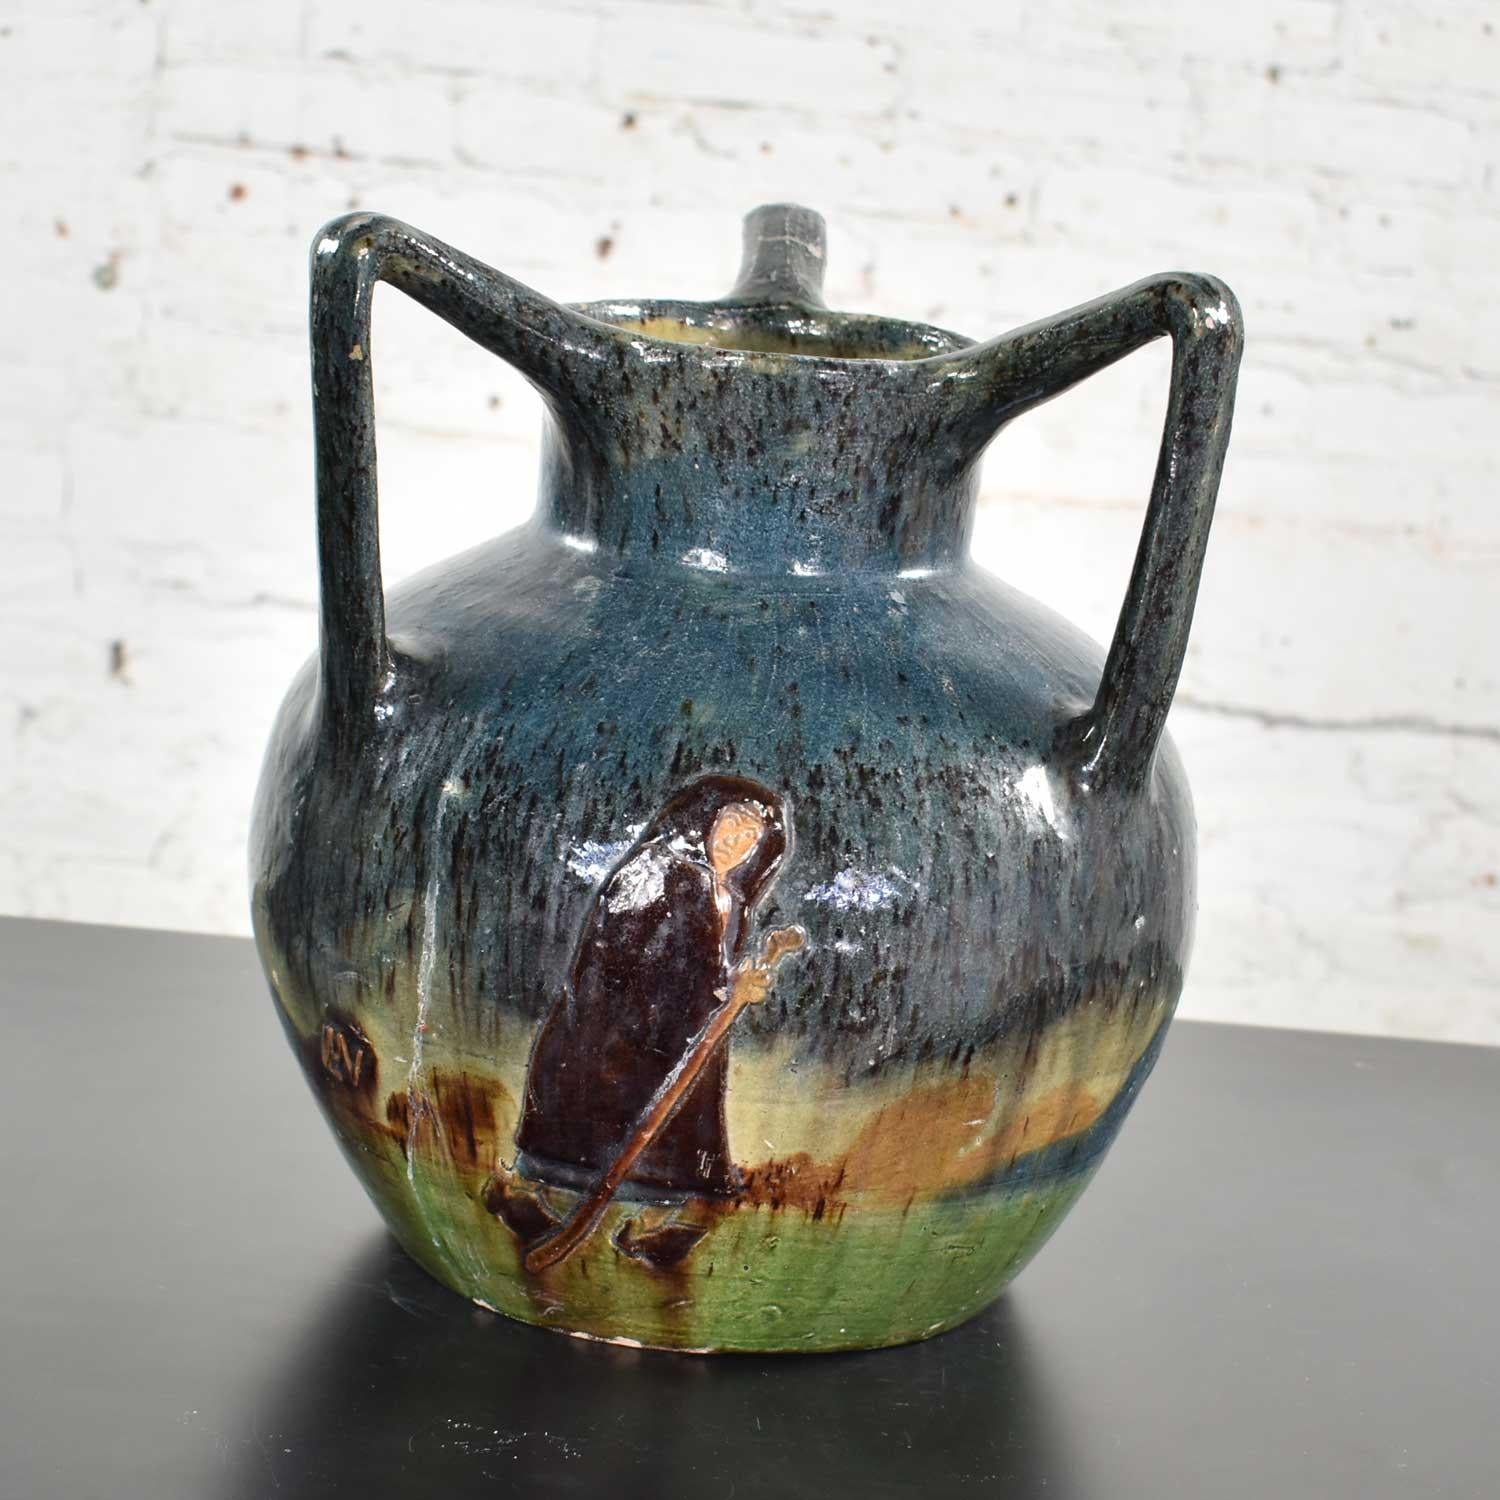 Handsome Art Nouveau Flemish earthenware three handled vase with applied L.M.V mark and decorated with figures in landscape. It is in good vintage condition. One handle has been restored and there are several glaze flakes and small chips; however,